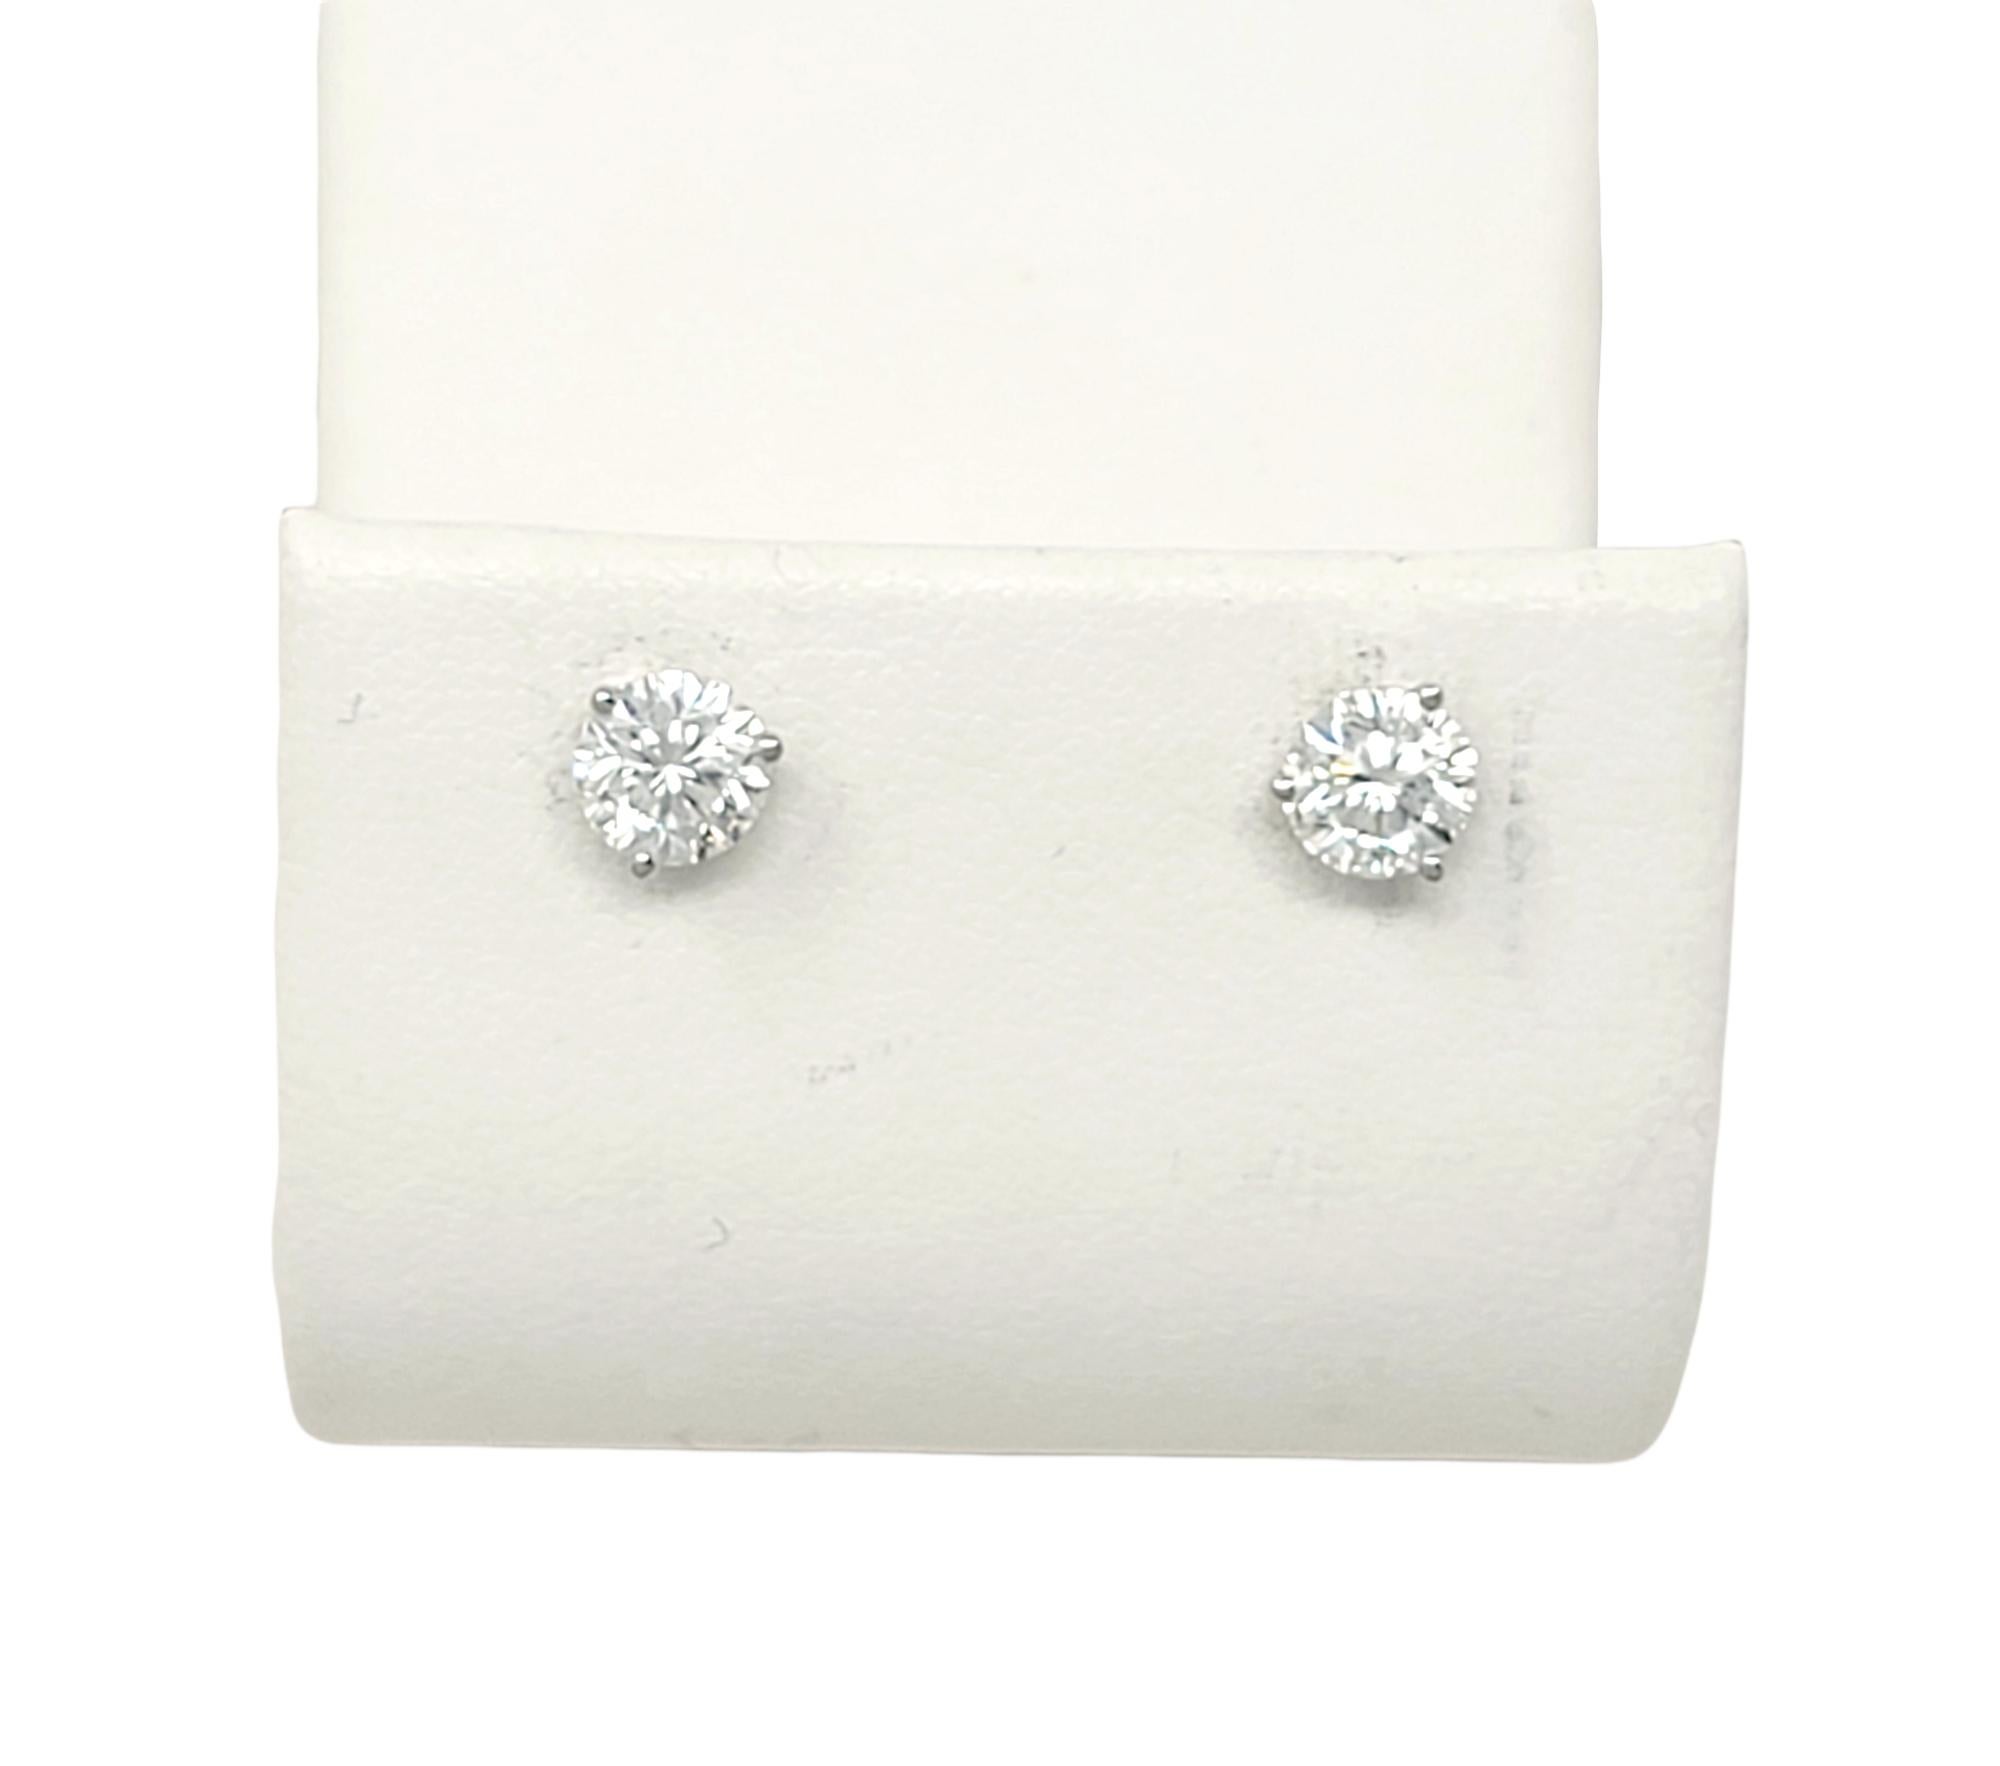 .94 Carats Total Round Leo Diamond Stud Earrings in White Gold 3 Prong Setting For Sale 5